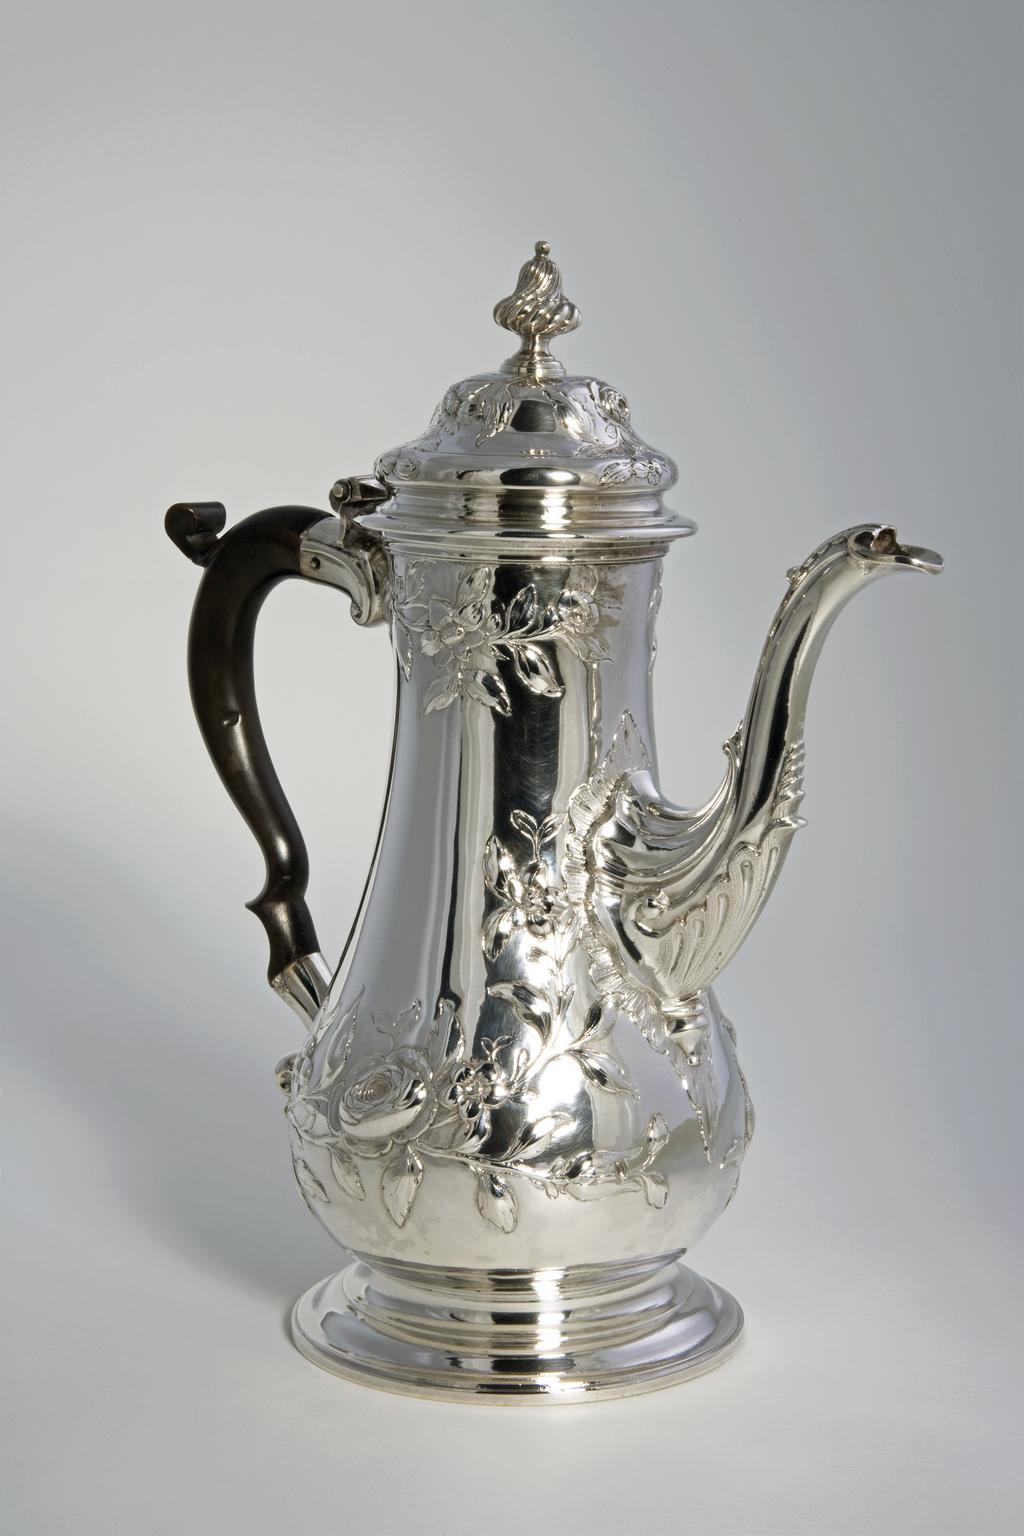 An image of Coffee Pot. Swift, John (British). The tall pear-shaped body is embossed with sprays of leaves and flowers. The top of the swan's neck spout is leaf capped, the lower part embossed with flutes and a stylised shell. The body stands on a spreading circular foot. The domed cover is embossed with sprays of flowers and has a wythern silver knop. The double scroll handle is of wood. Silver, embossed and chased, height, to knop, 28.8 cm, width, spout to handle, 23.5 cm, weight, gross, 1020 g, circa 1763-1764. Production Place: London, England.  Rococo.